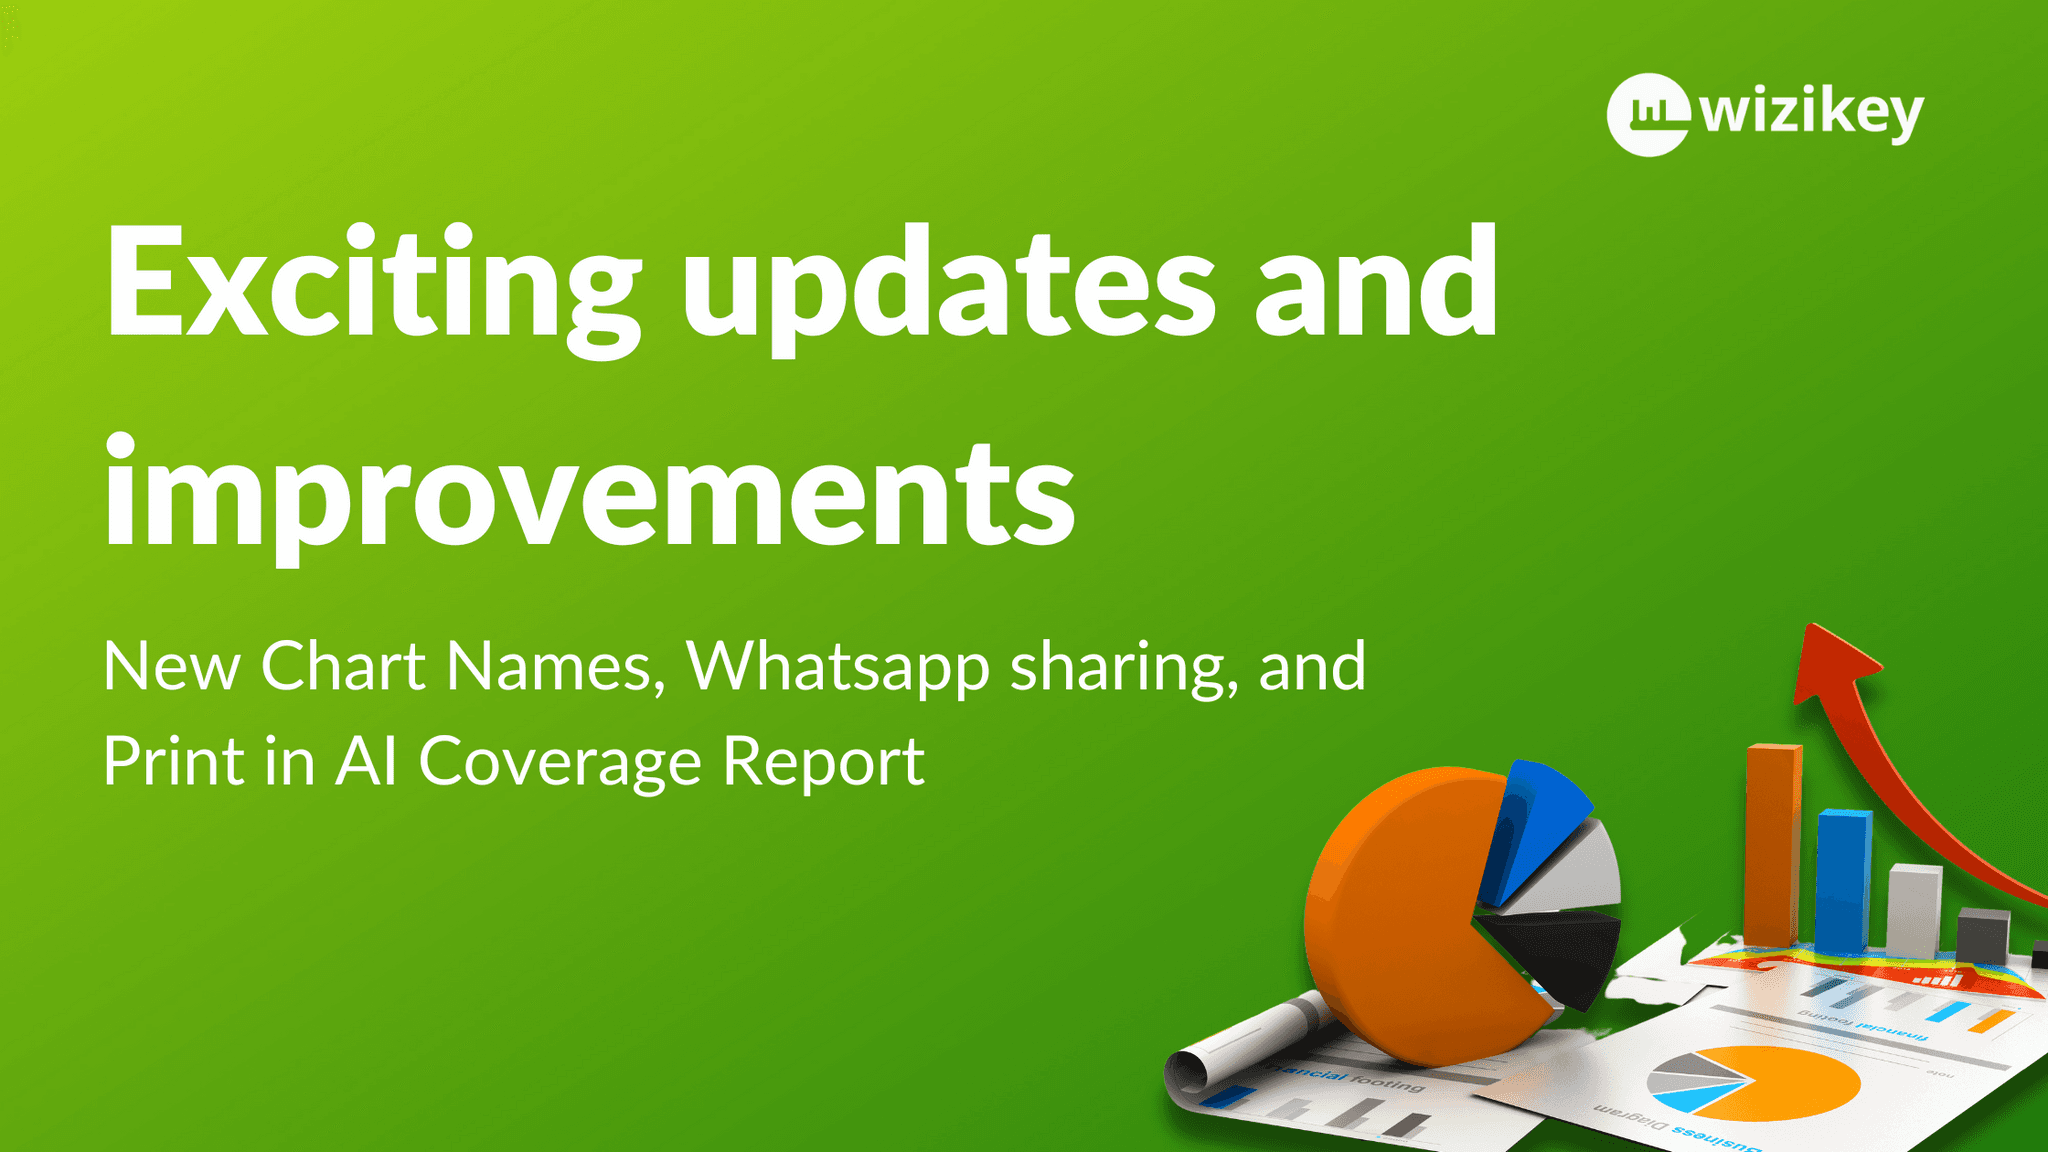 Updated Chart names, whatsapp sharing and more new updates for you.